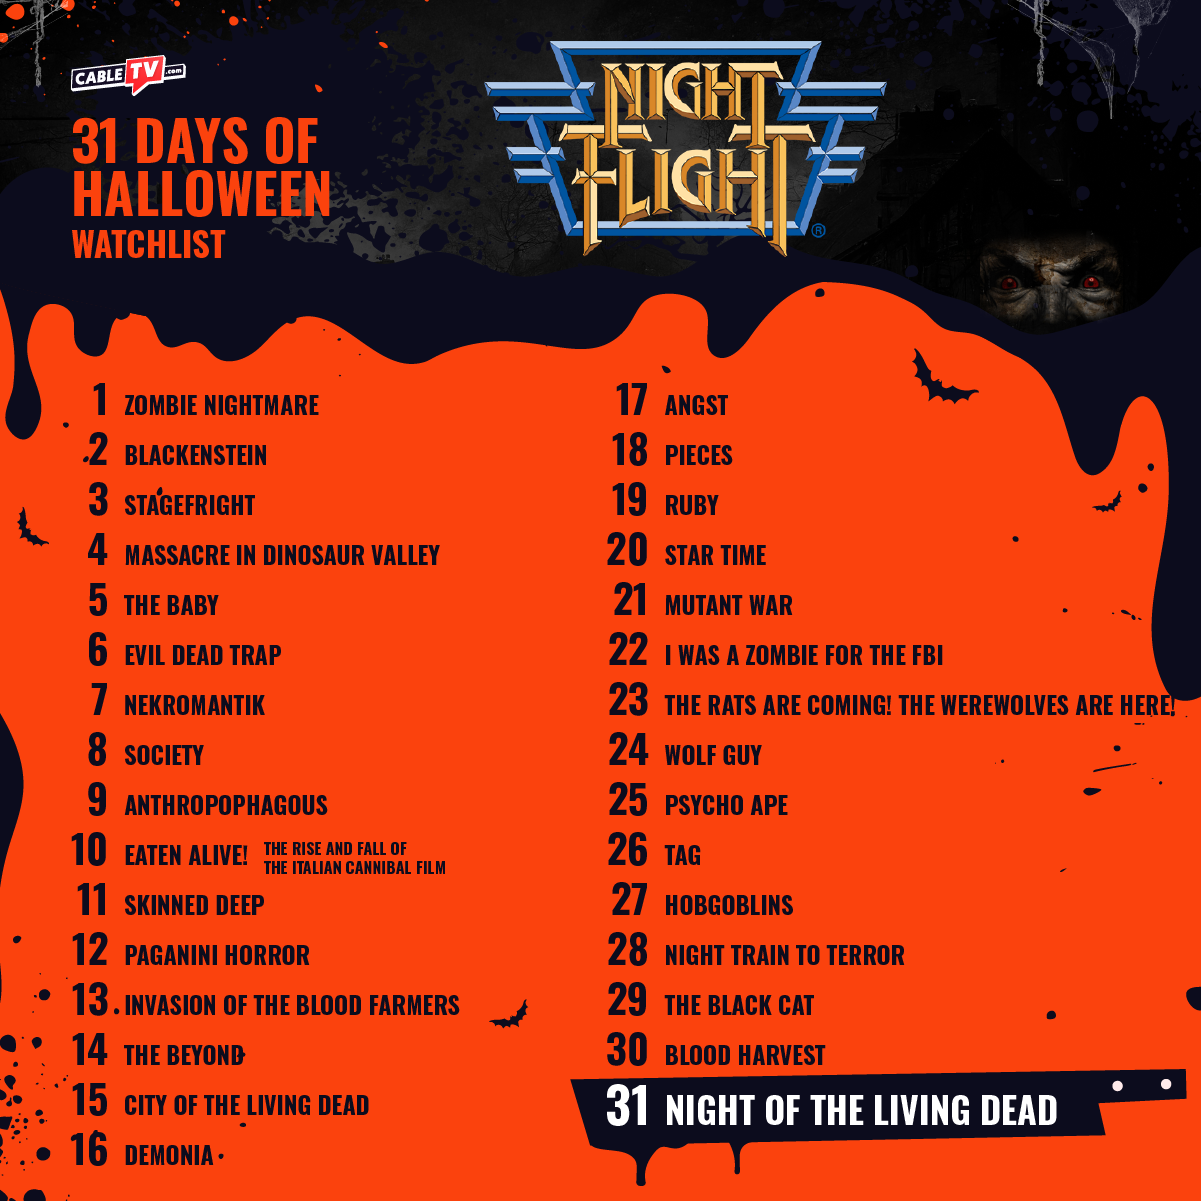 31 days of horror movie recommendations for Night Flight Plus.